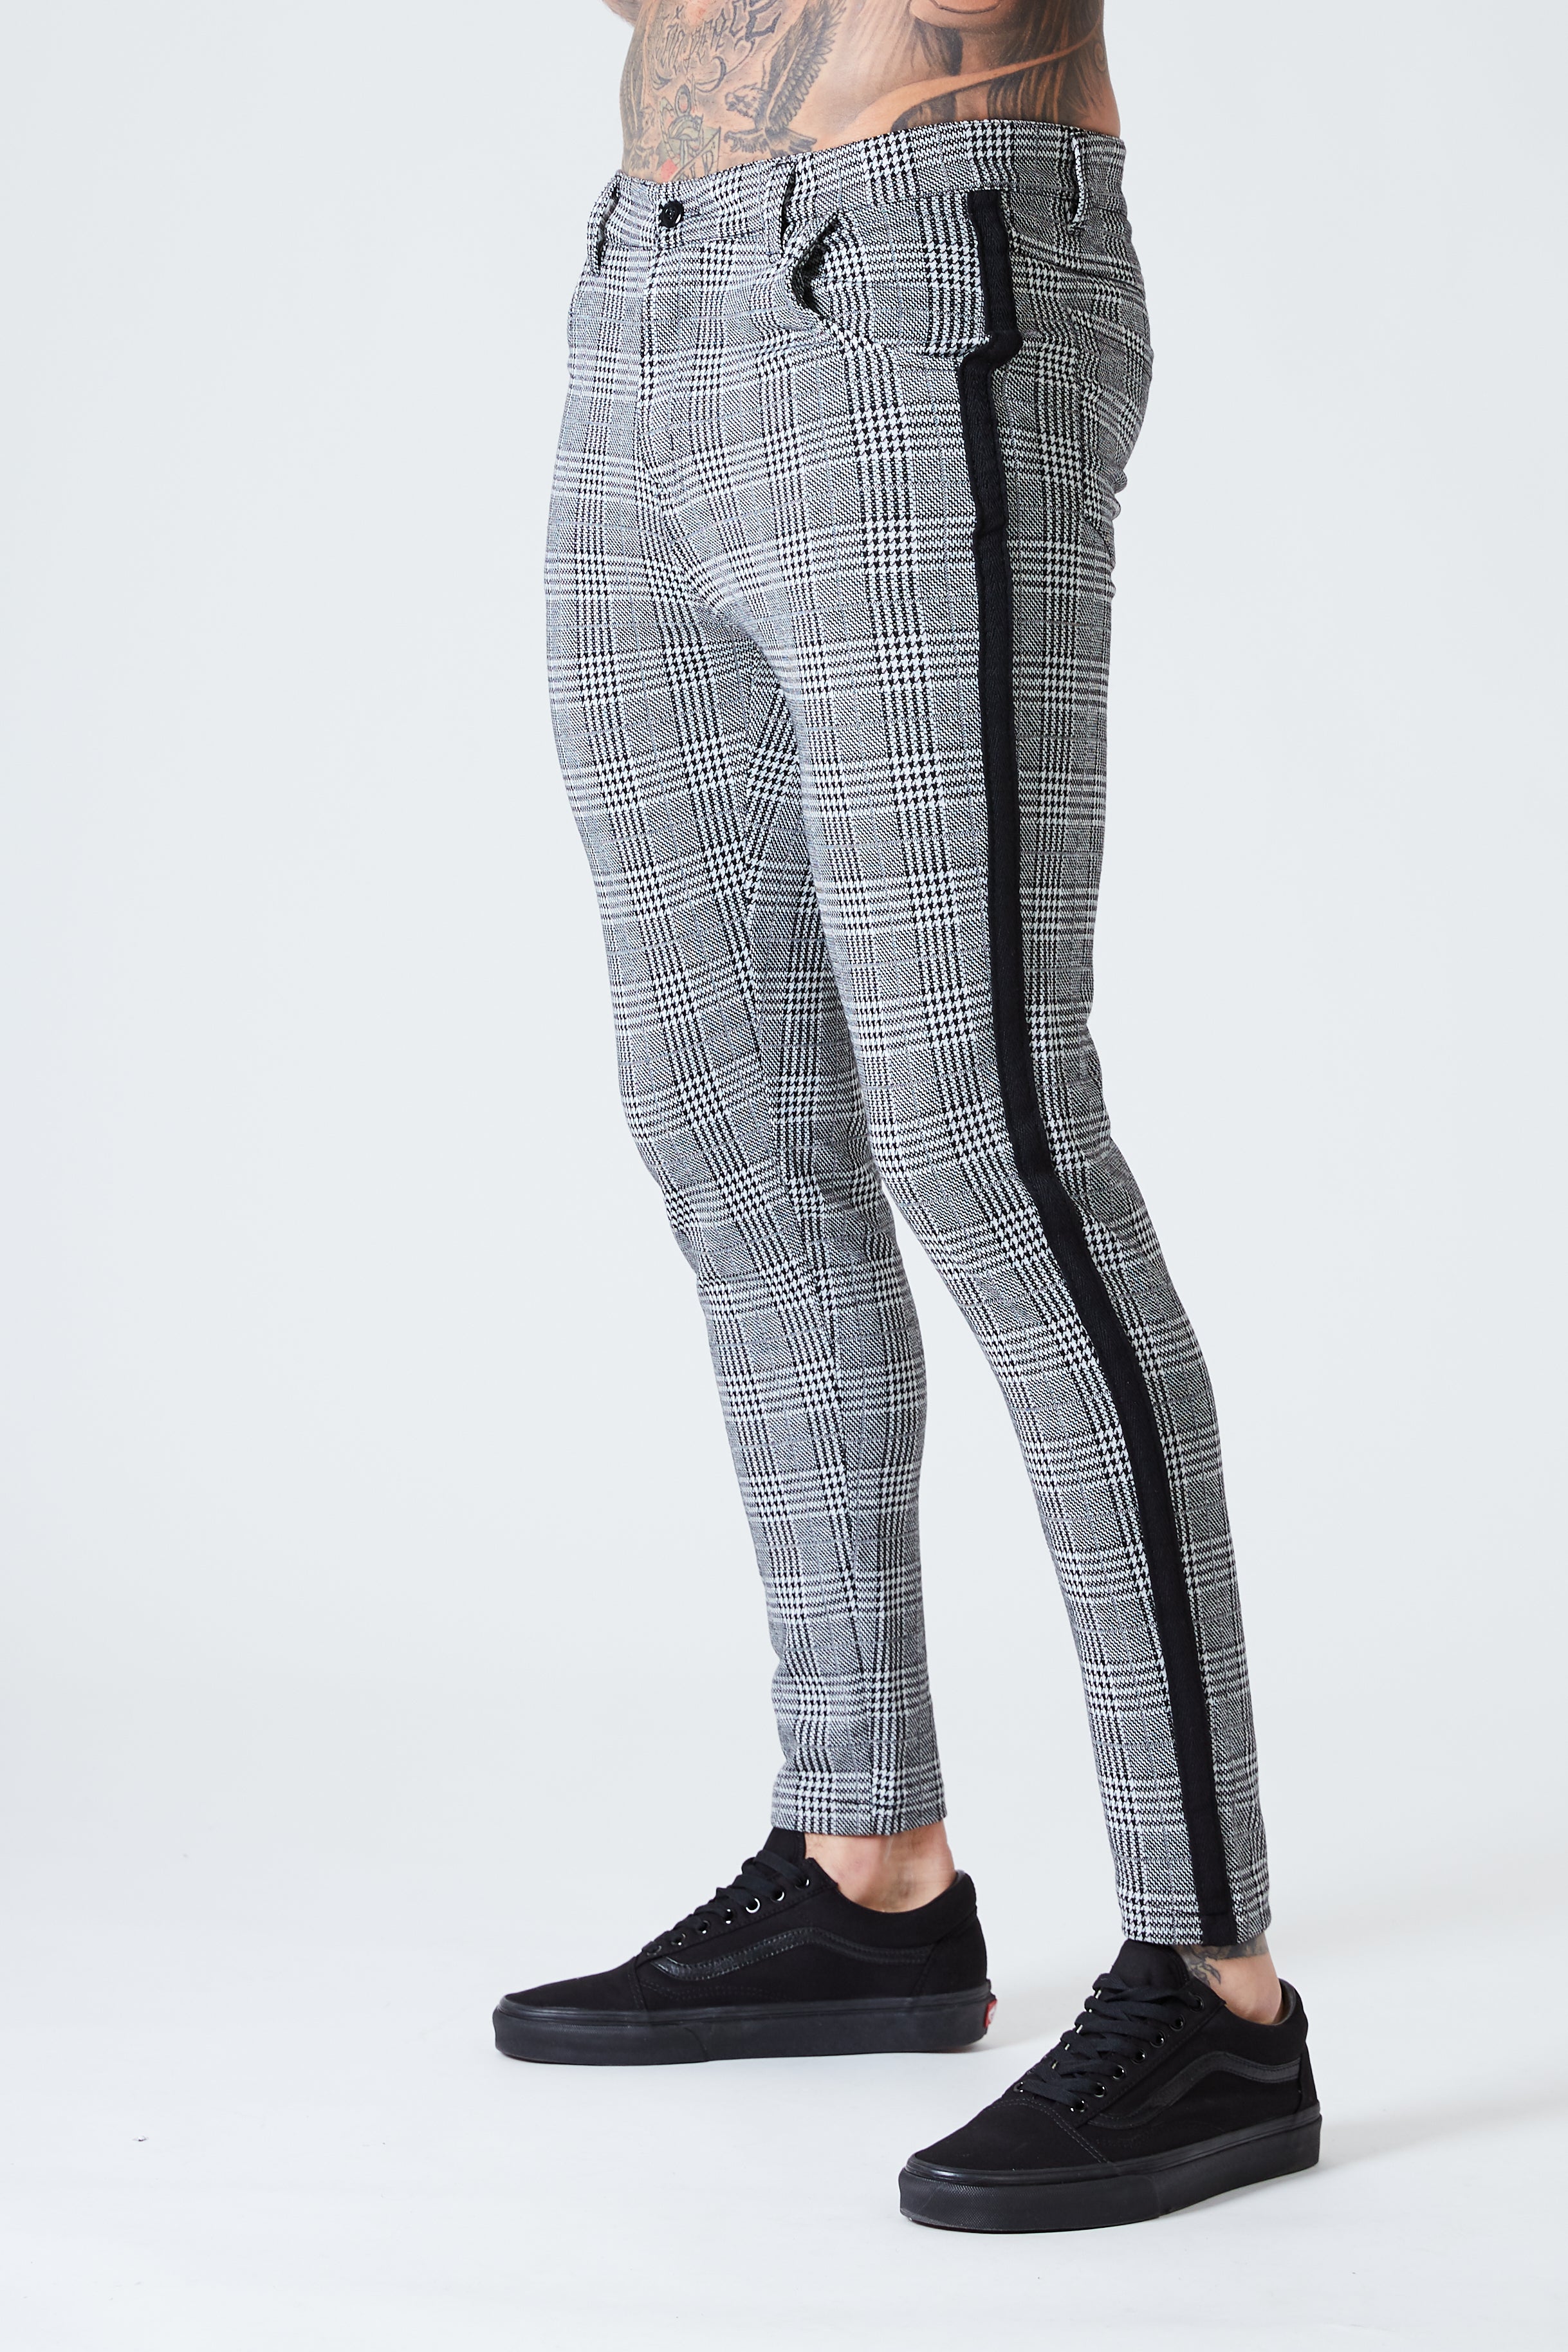 Checked trousers Skinny Fit - Black/White checked - Men | H&M IN